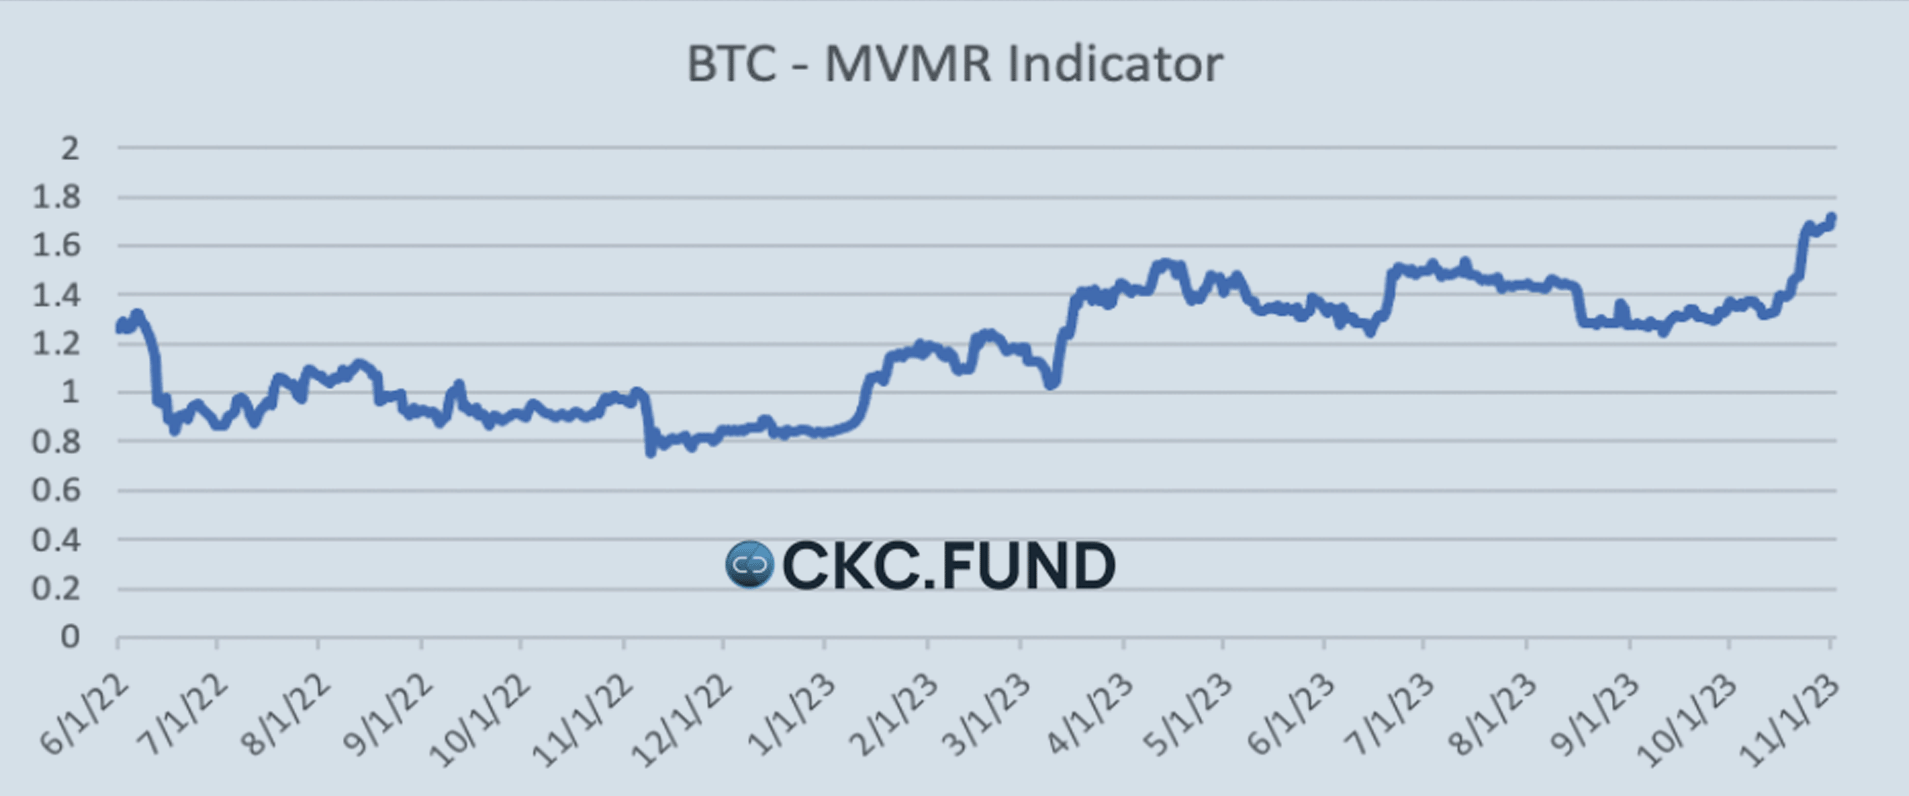 Line graph showing the increase in BTC-MVRV Indicator over time, highlighting a rise to 1.7, suggesting a change in market cycle and investor behavior towards Bitcoin.